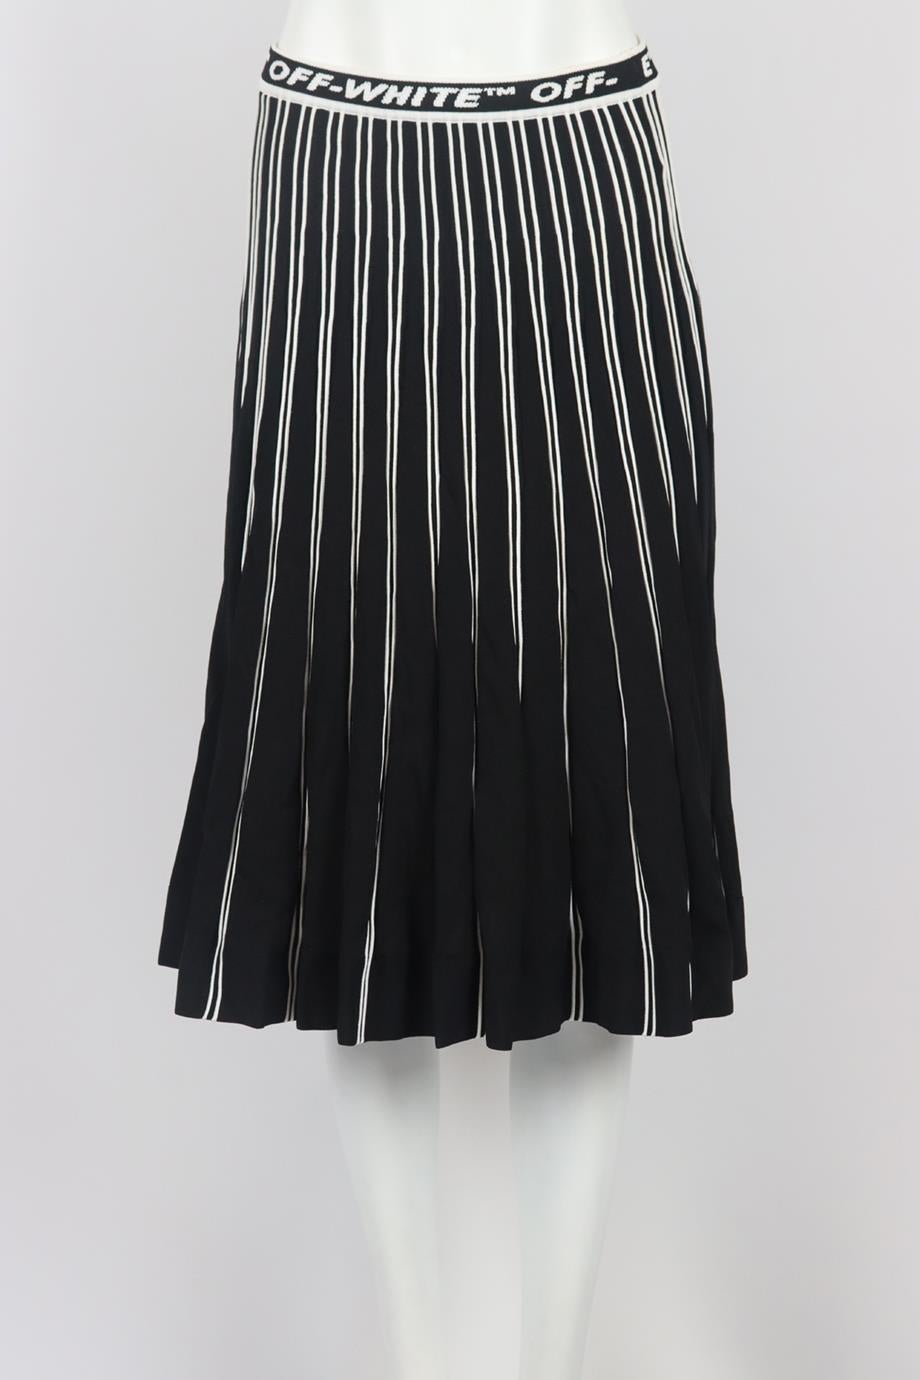 Off-White c/o Virgil Abloh pleated jaquard midi skirt. Black and white. Pull on. Size: Small (UK 8, US 4, FR 36, IT 40). Waist: 27 in. Hips: 32 in. Length: 27.6 in. Size and composition label cut out for comfort; see pictures.